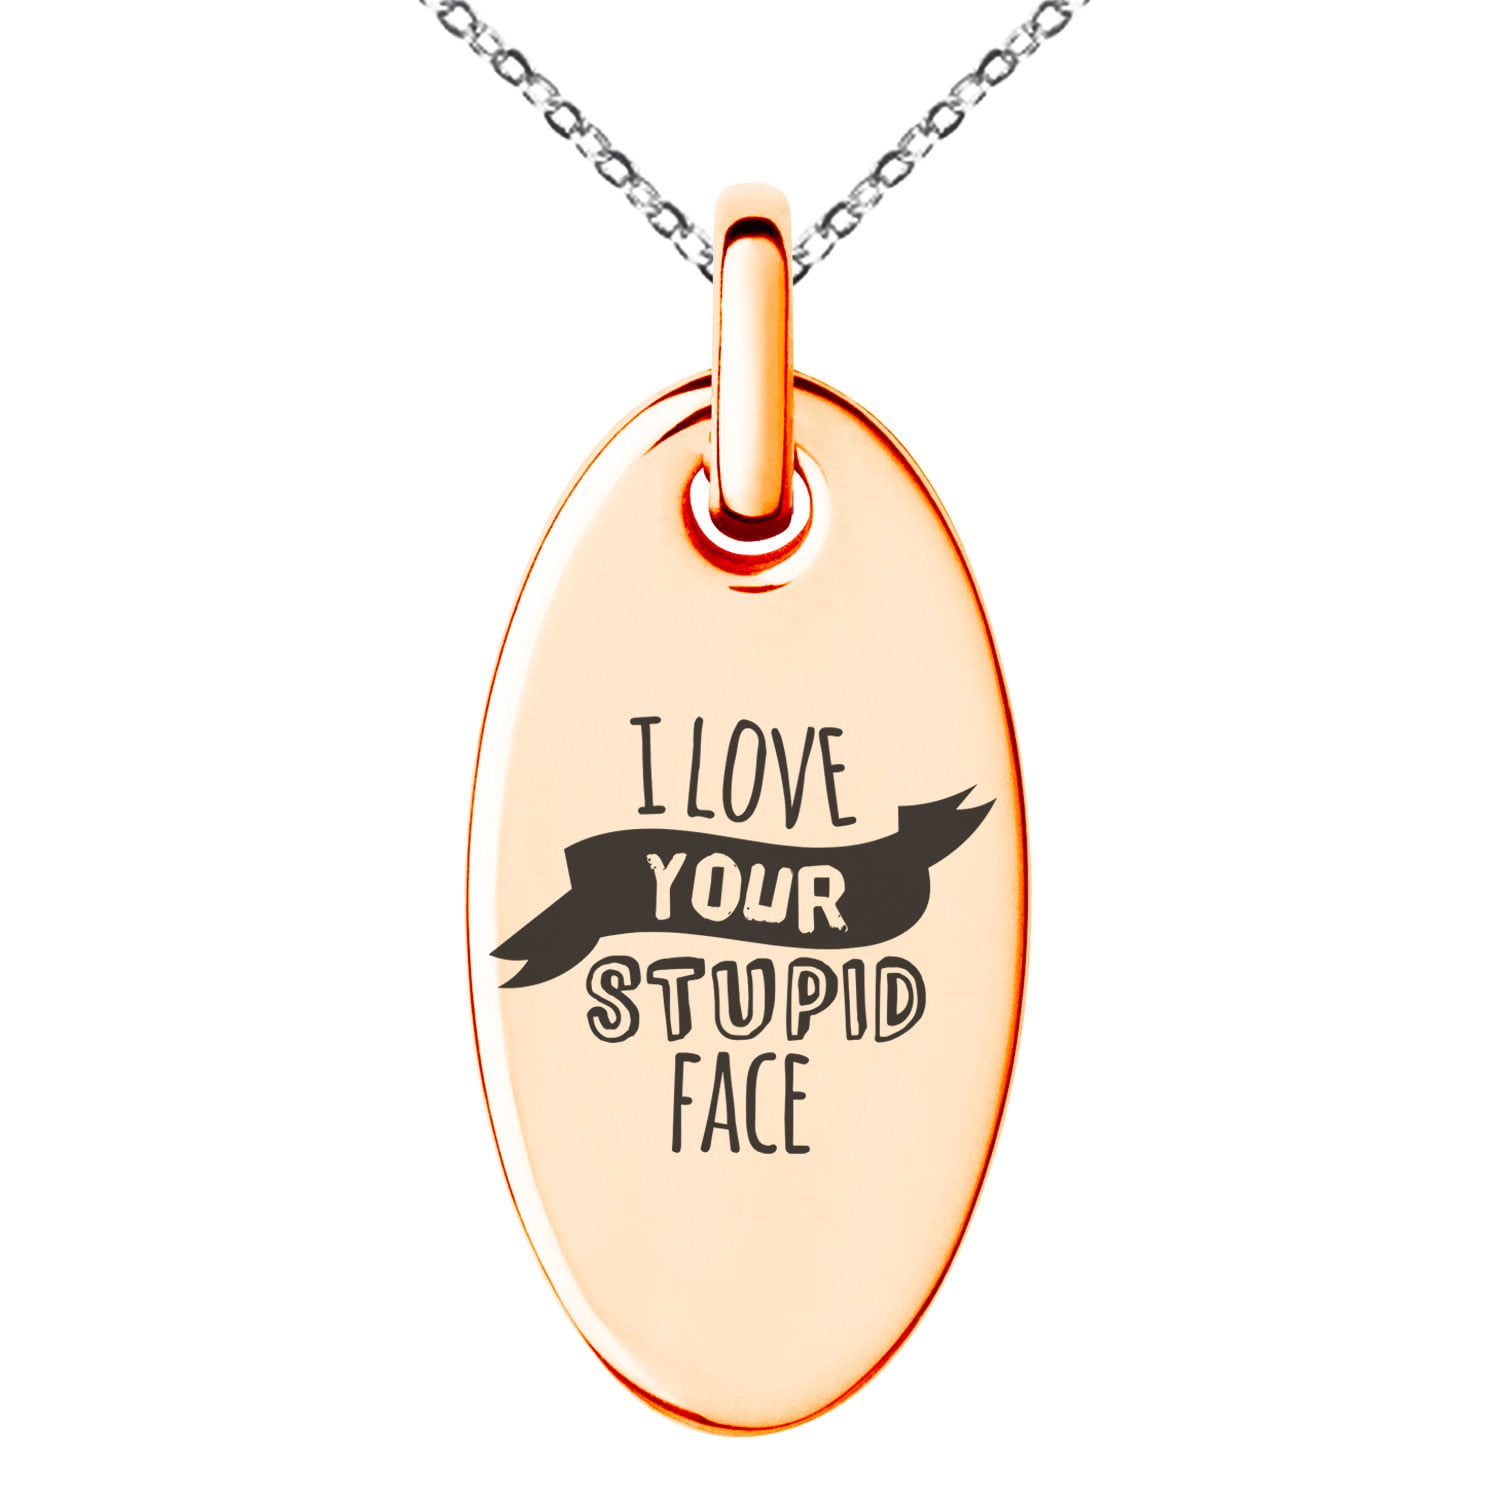 Tioneer Stainless Steel I Love Your Stupid Face Oval Head Key Charm Pendant Necklace